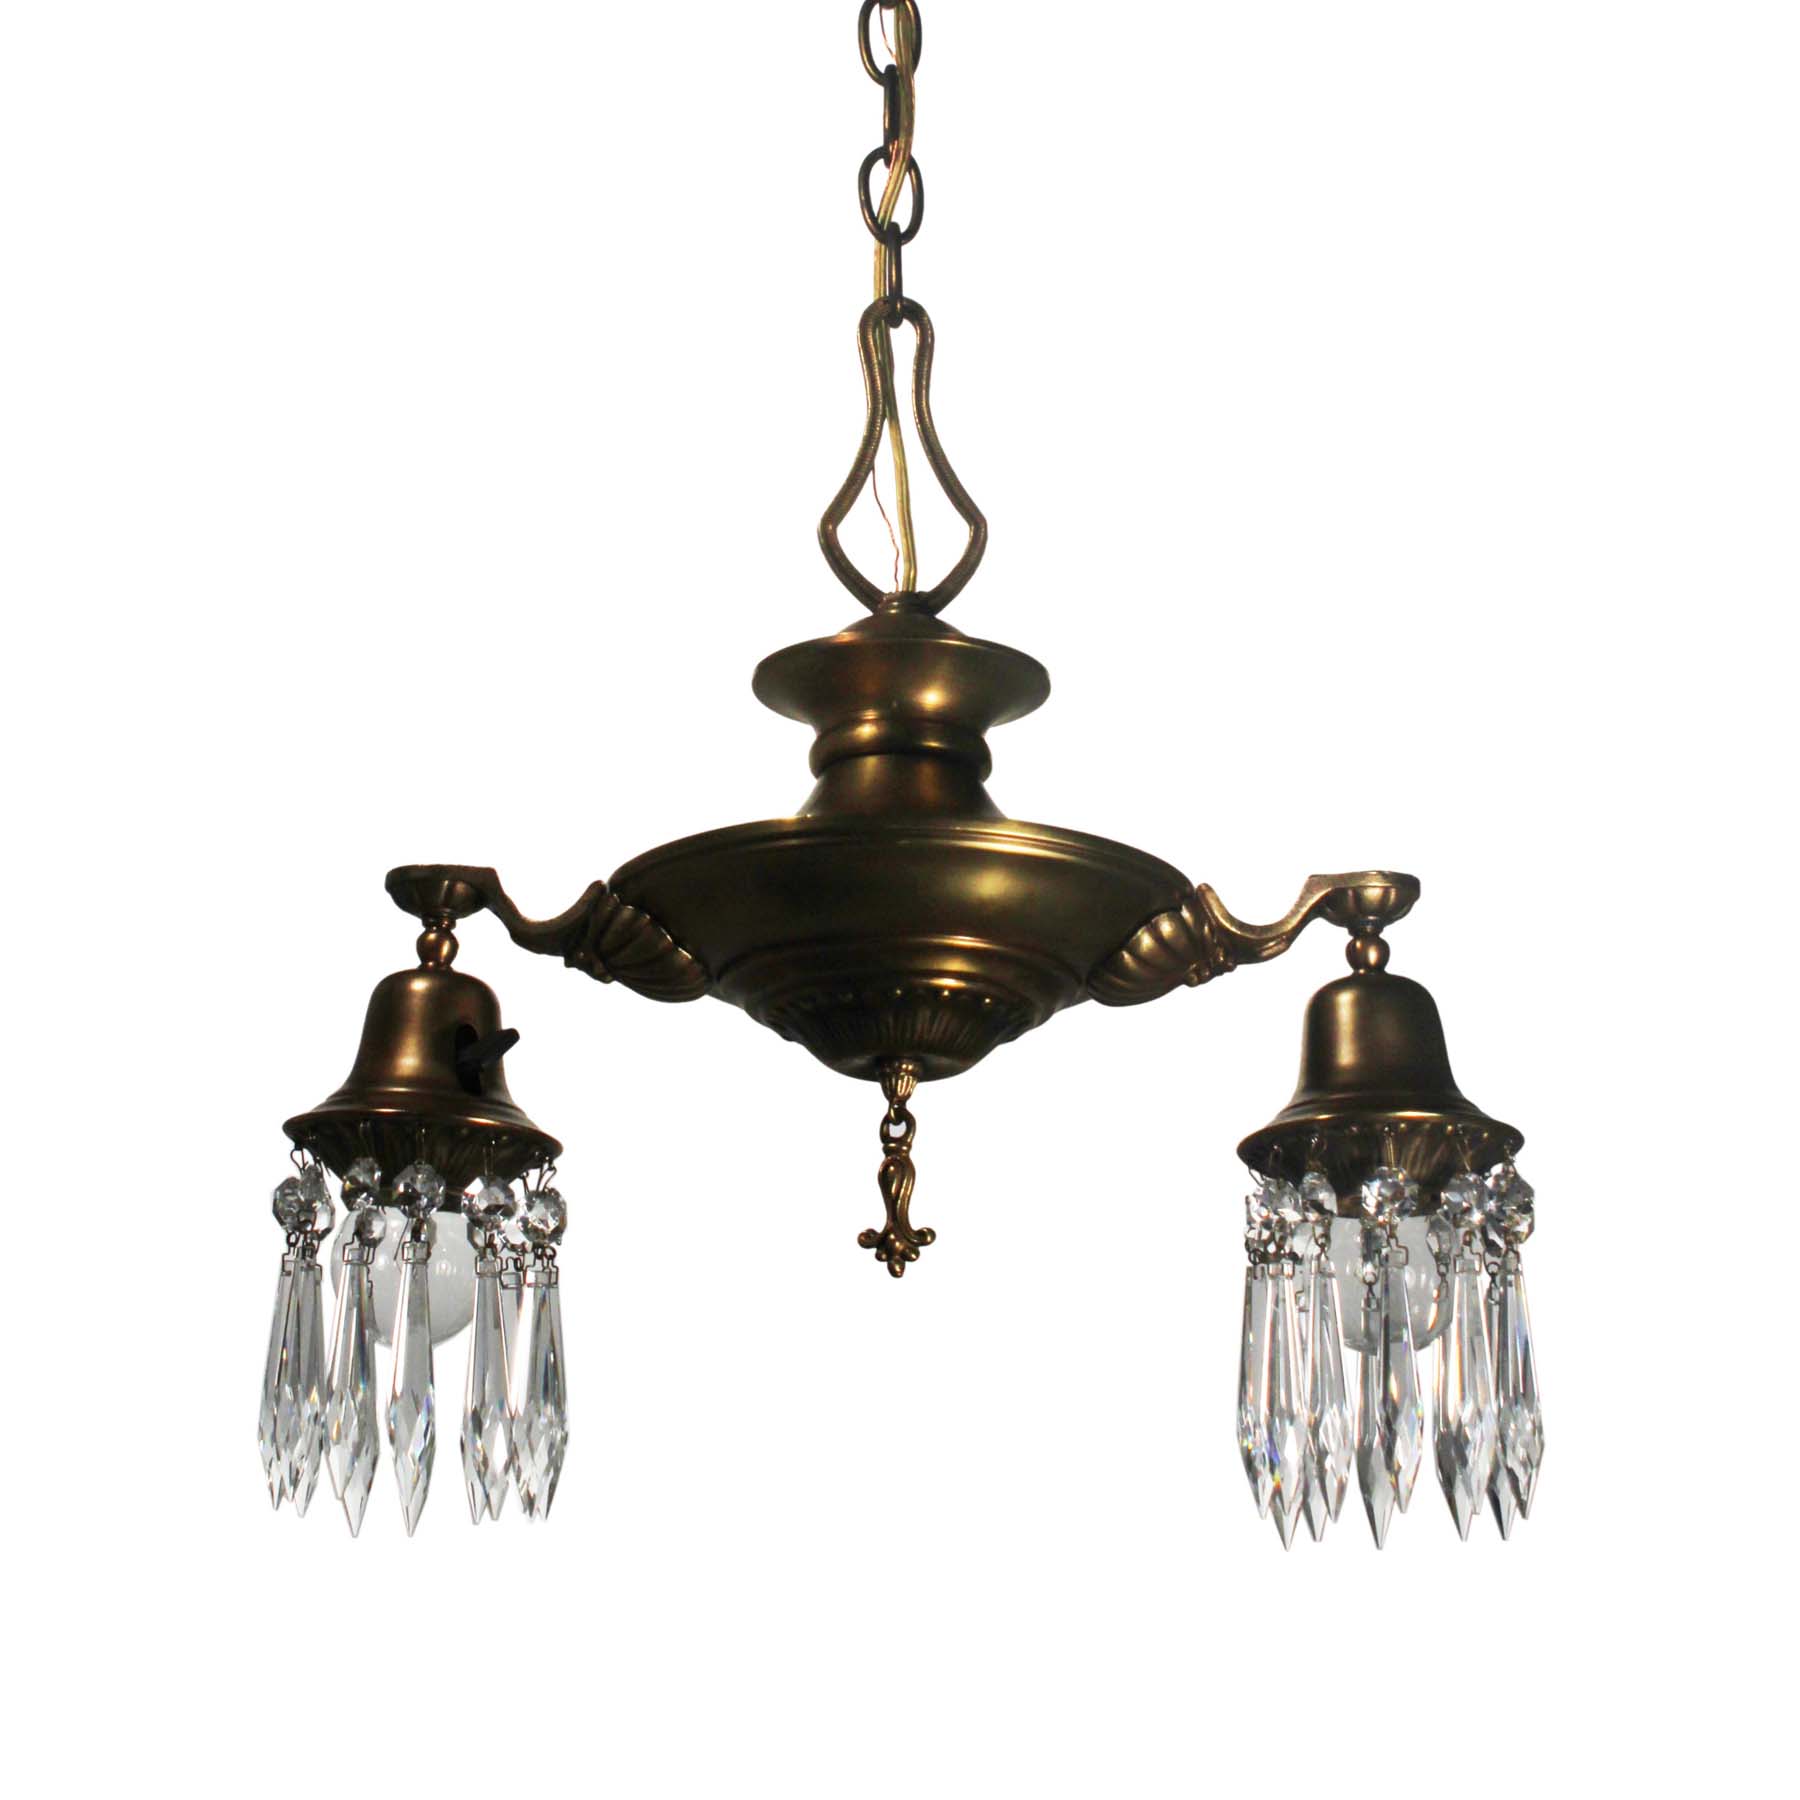 SOLD Brass Two Light Chandelier with Prisms, Antique Lighting-0